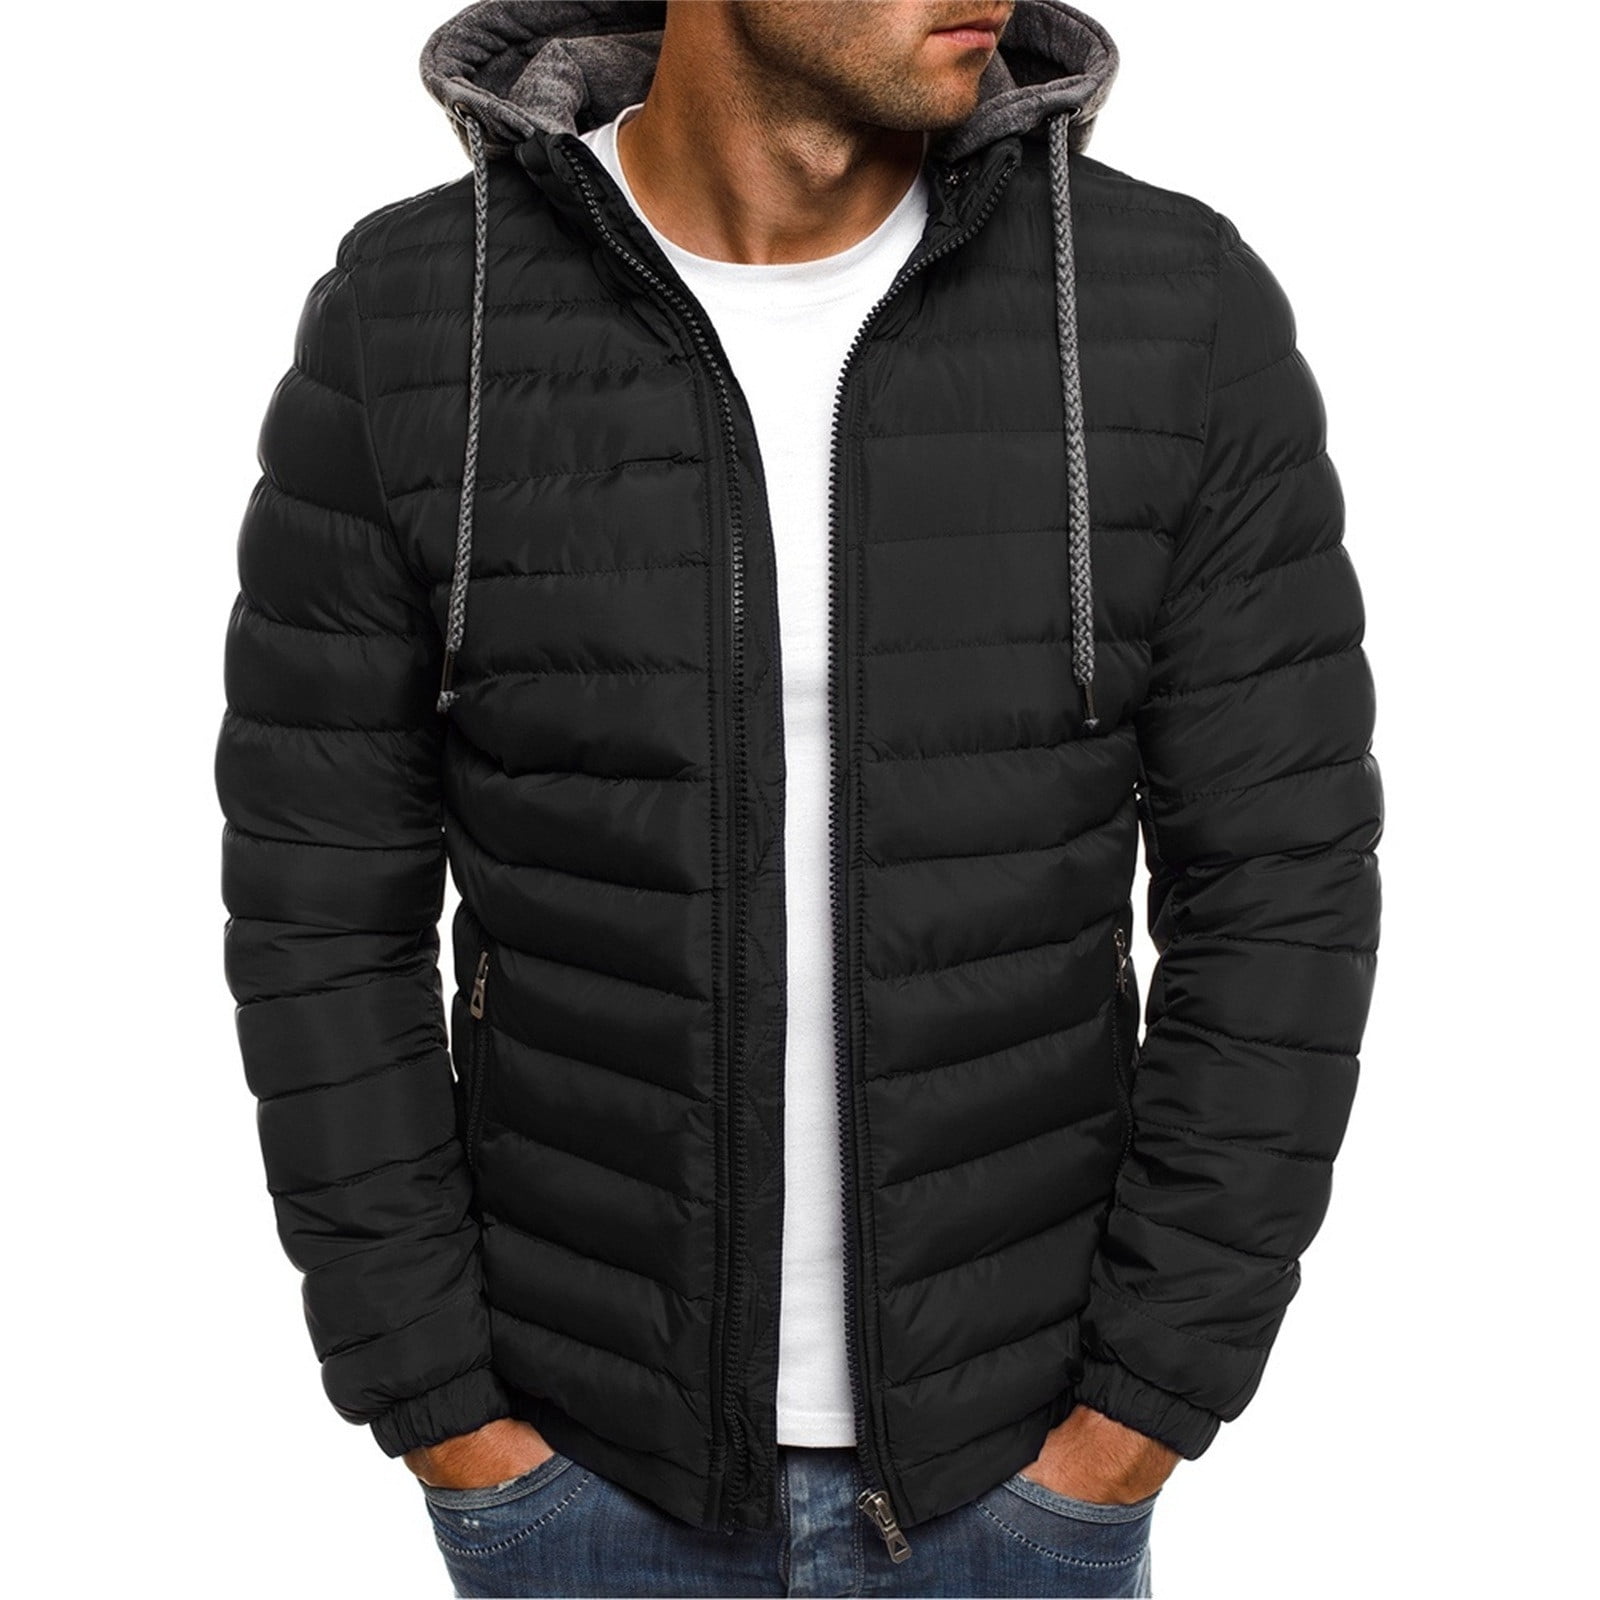 VBXOAE Winter Jacket for Men Solid Casual Thicken Hooded Zipper Winter Keep  Warm with Hood Jacket Coats 